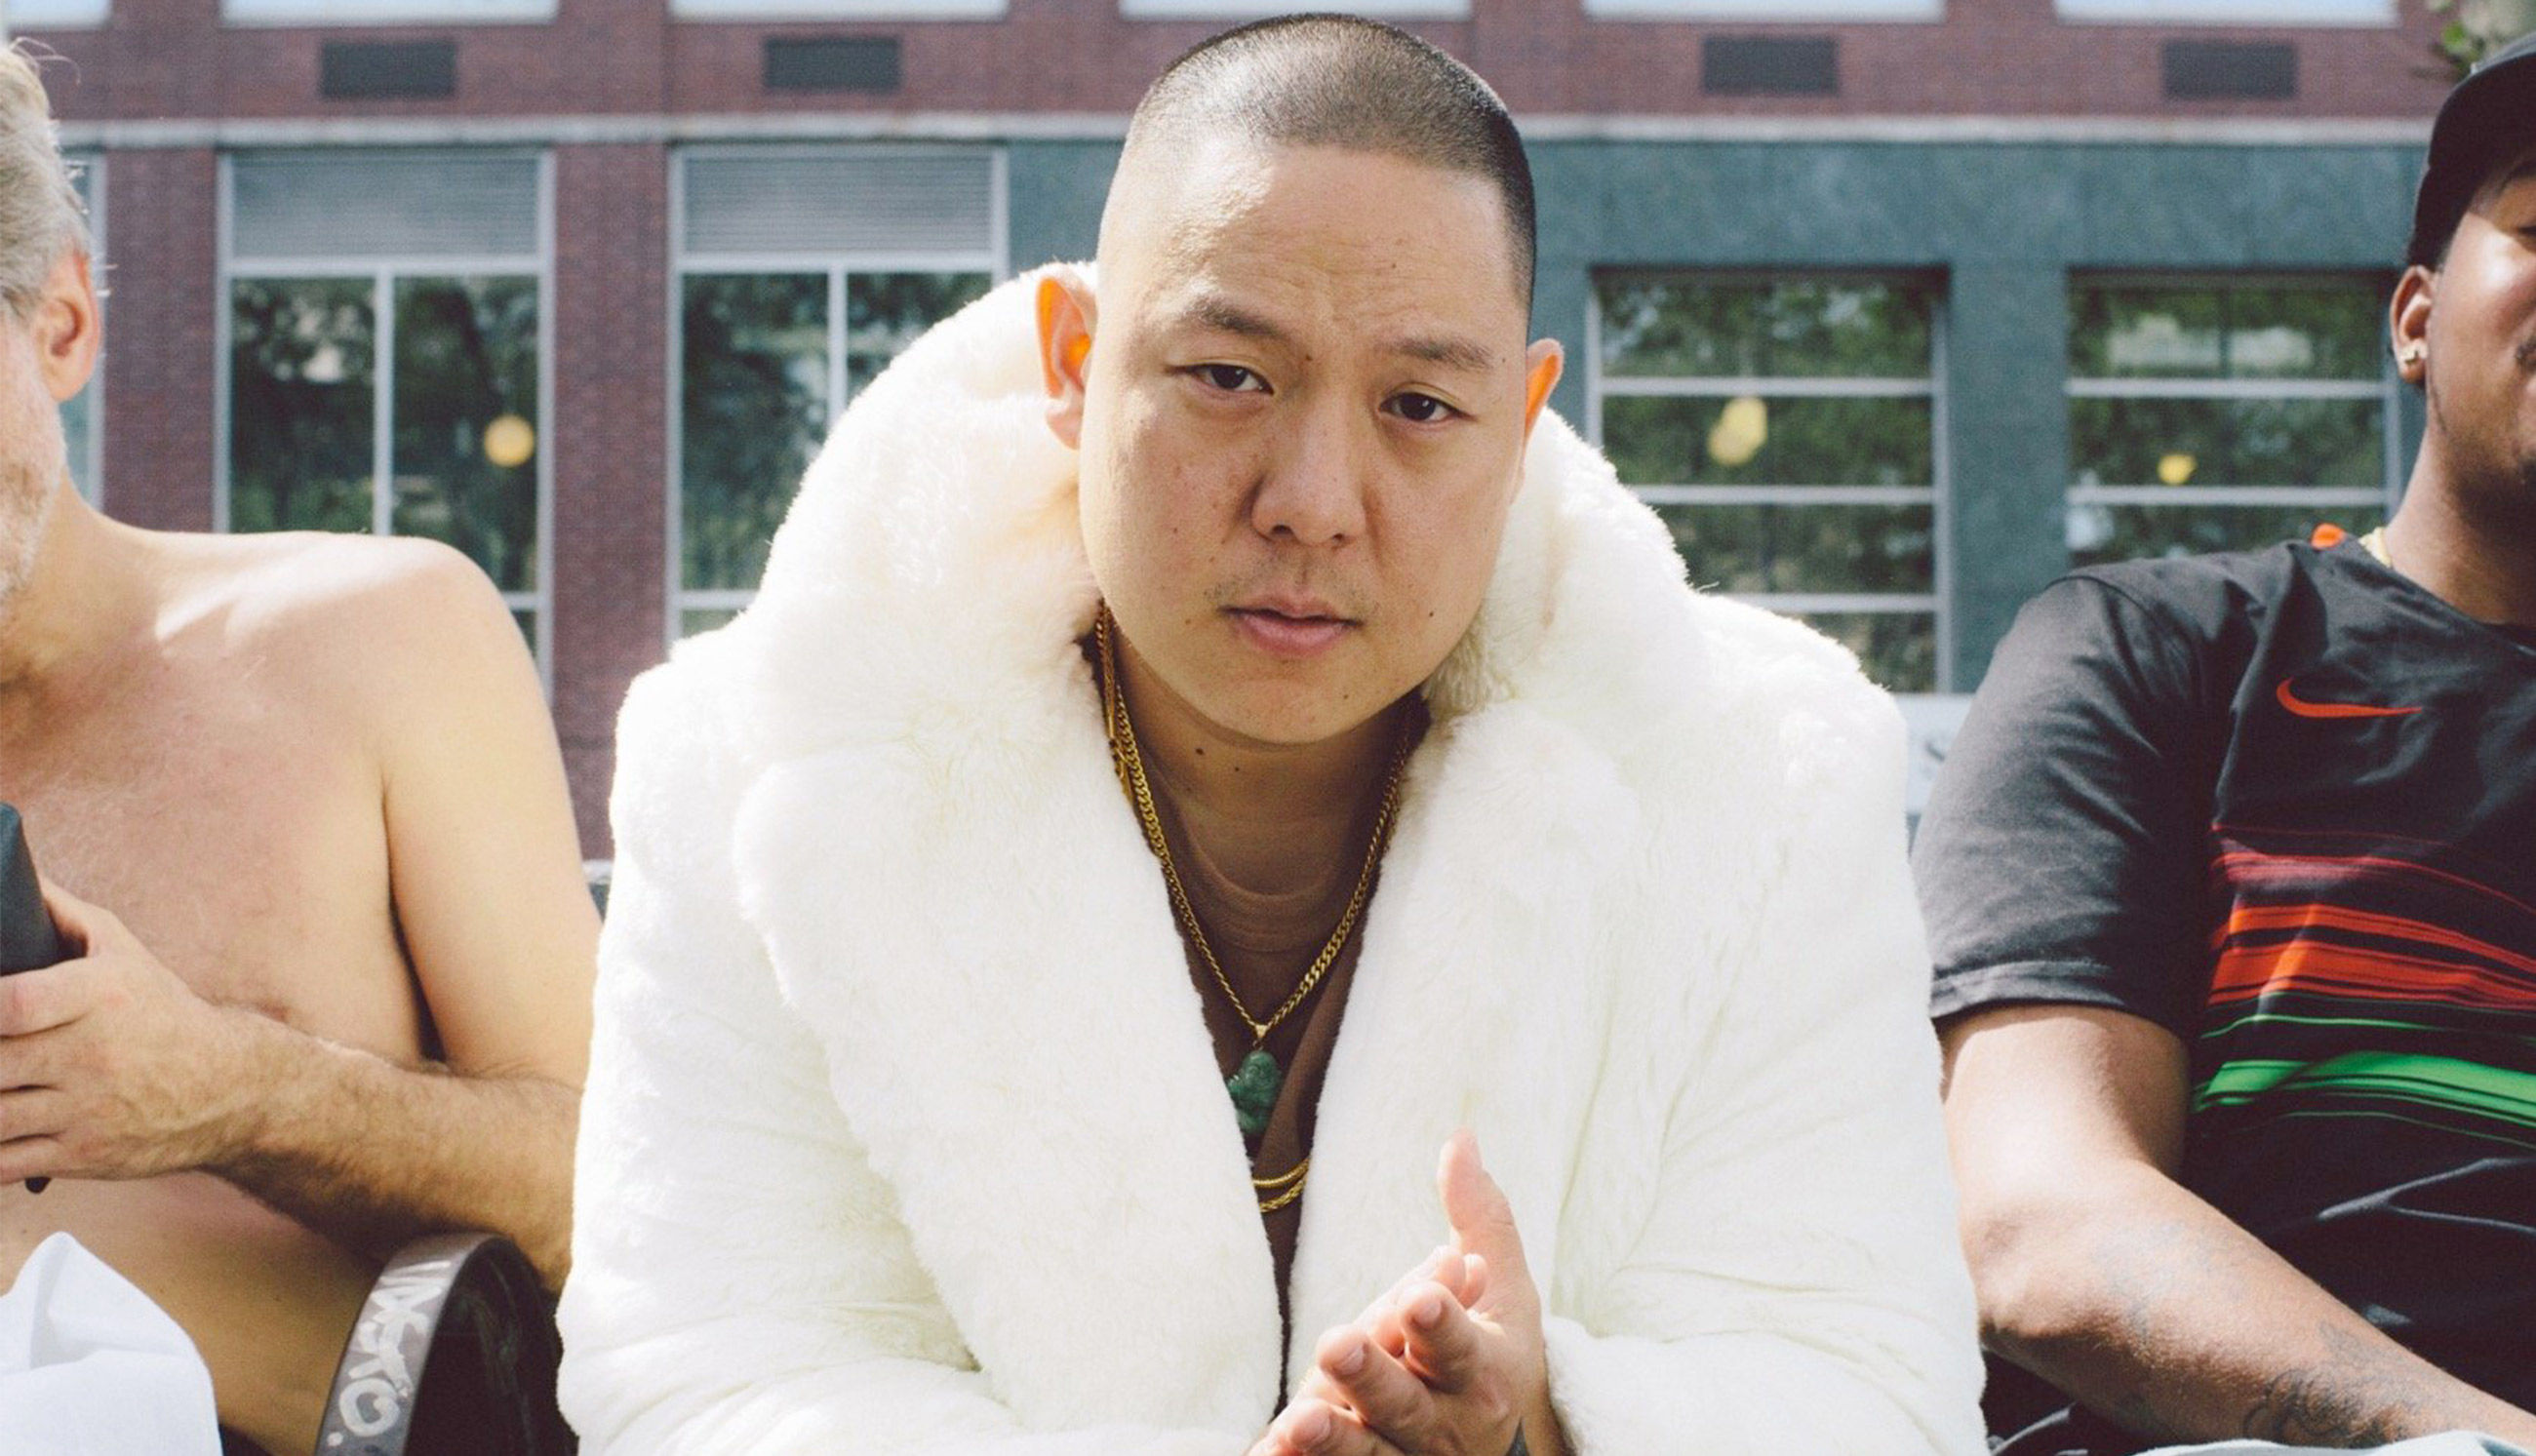 Eddie Huang, Rich Brian and 3 trendsetters with Asian backgrounds that can conquer the world